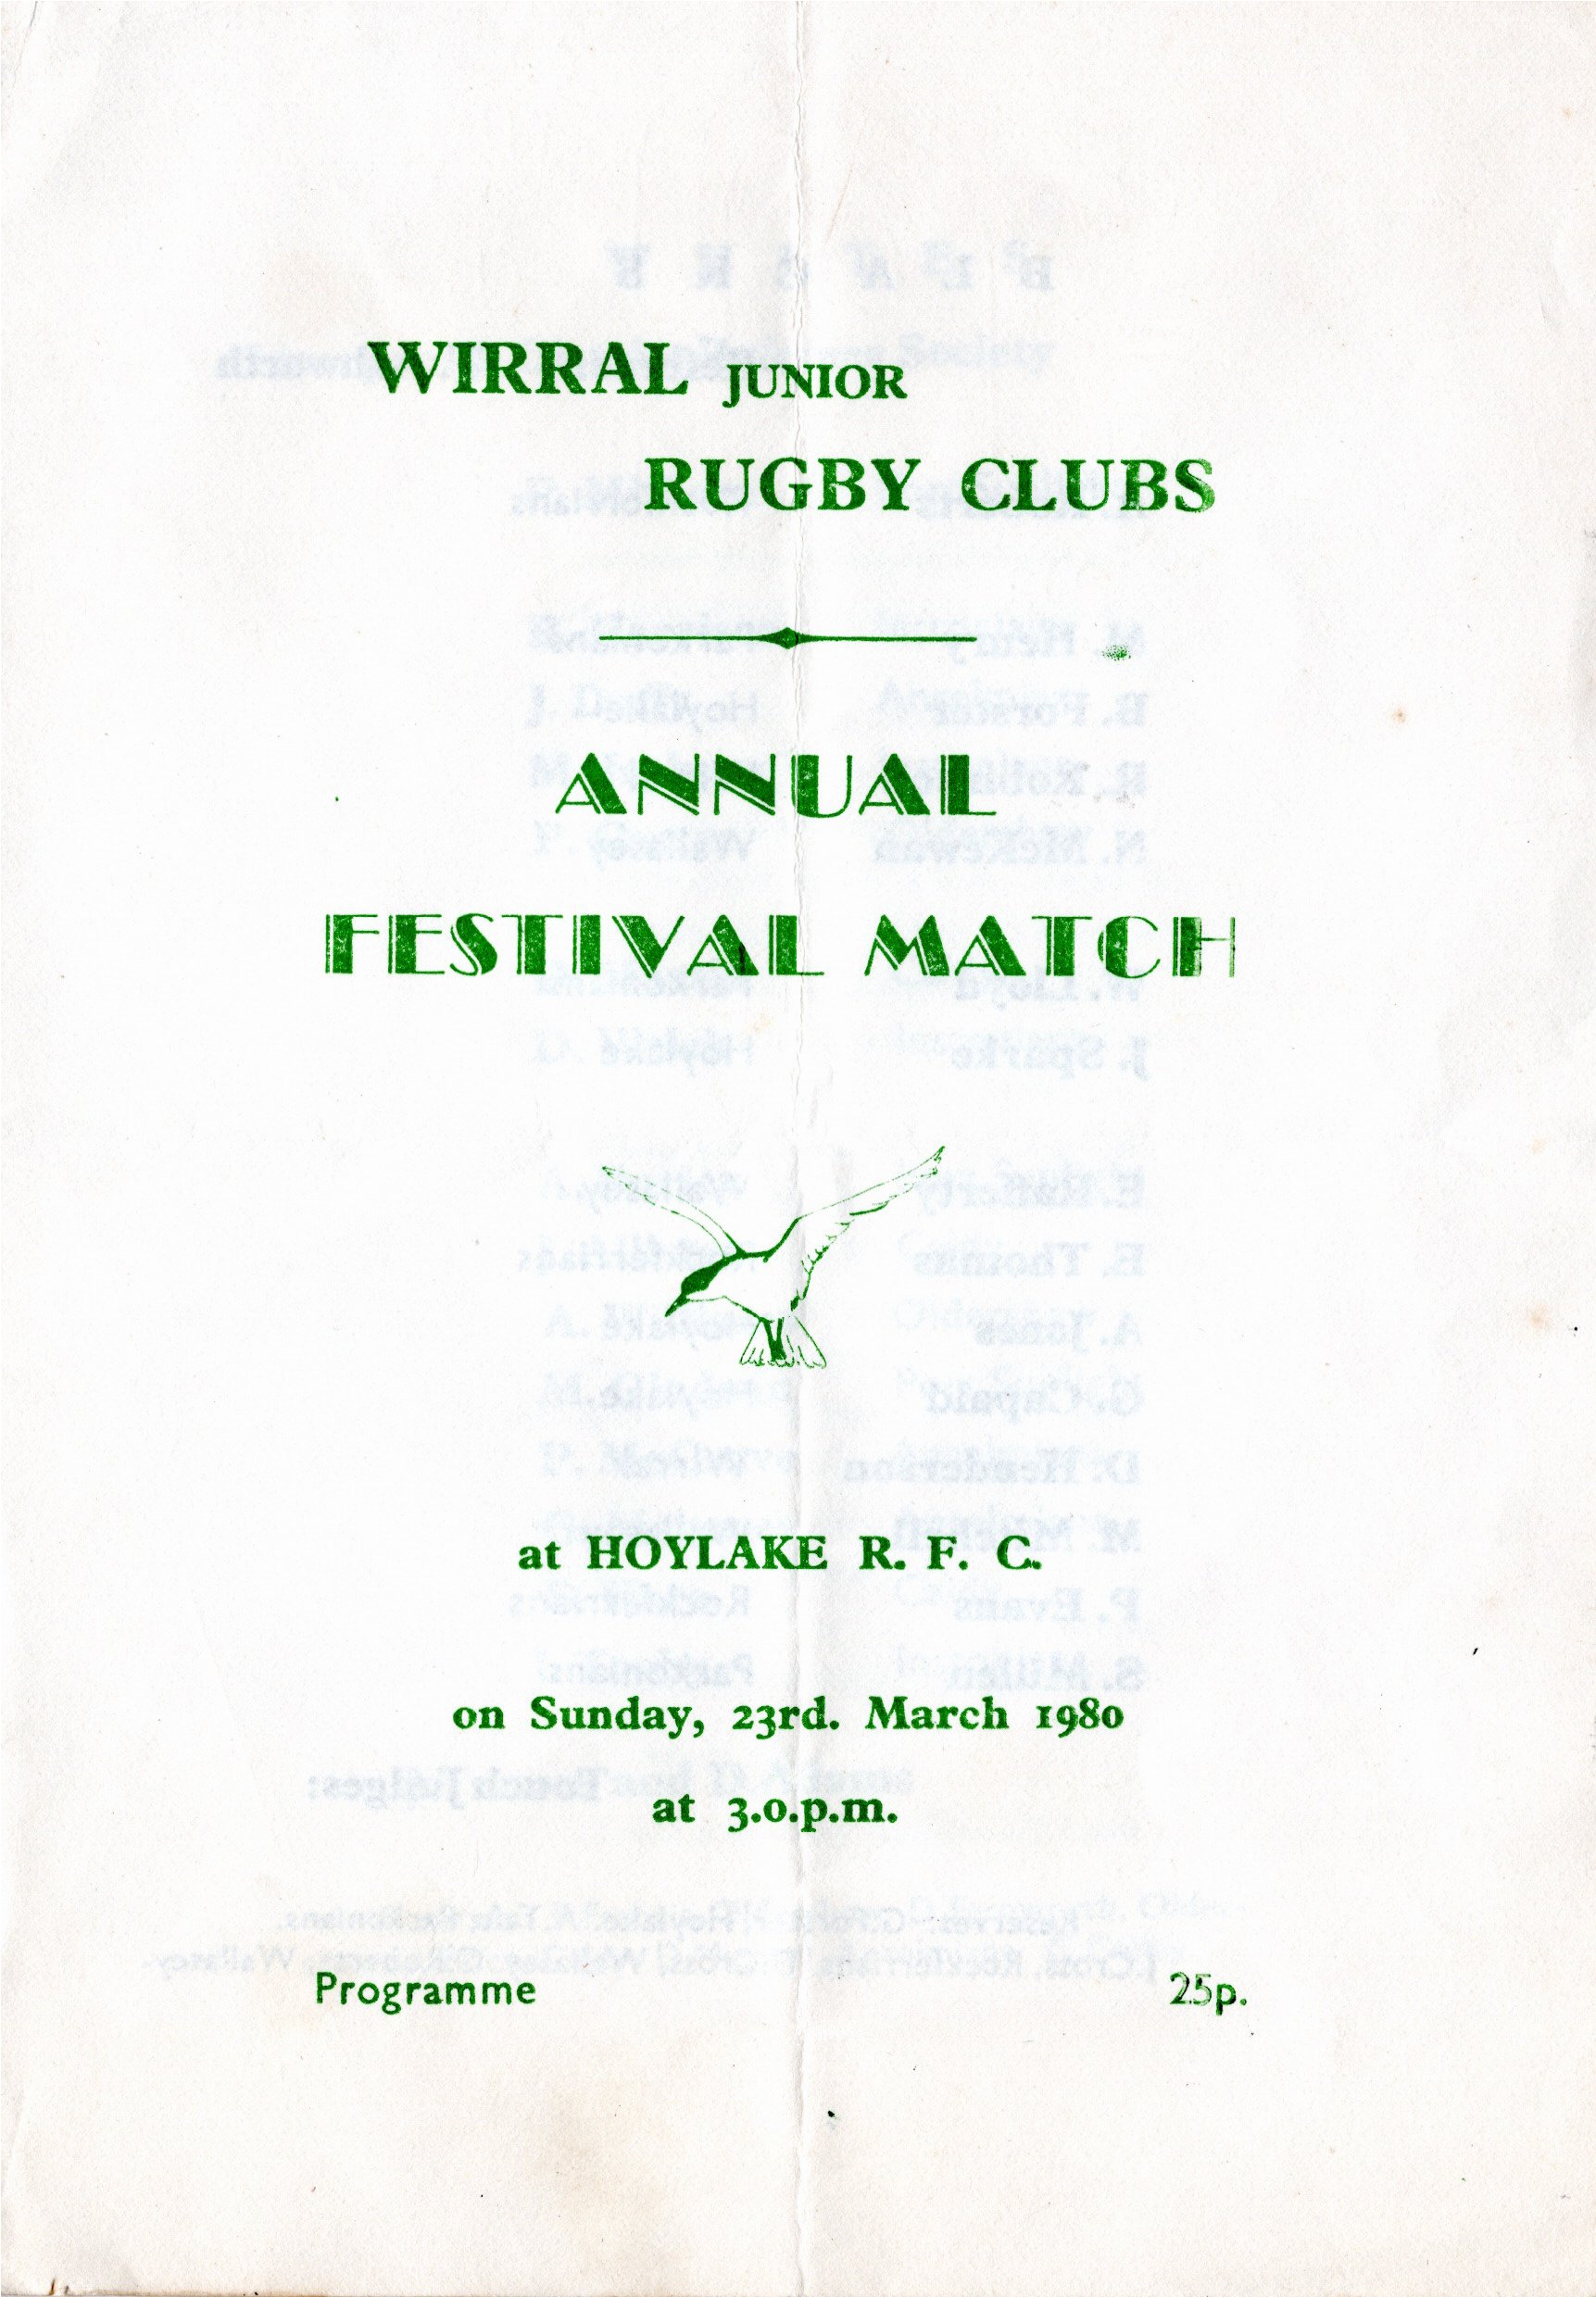 Photograph Old Instonians RUFC, Wirral Junior Rugby Clubs, Annual Festival Match